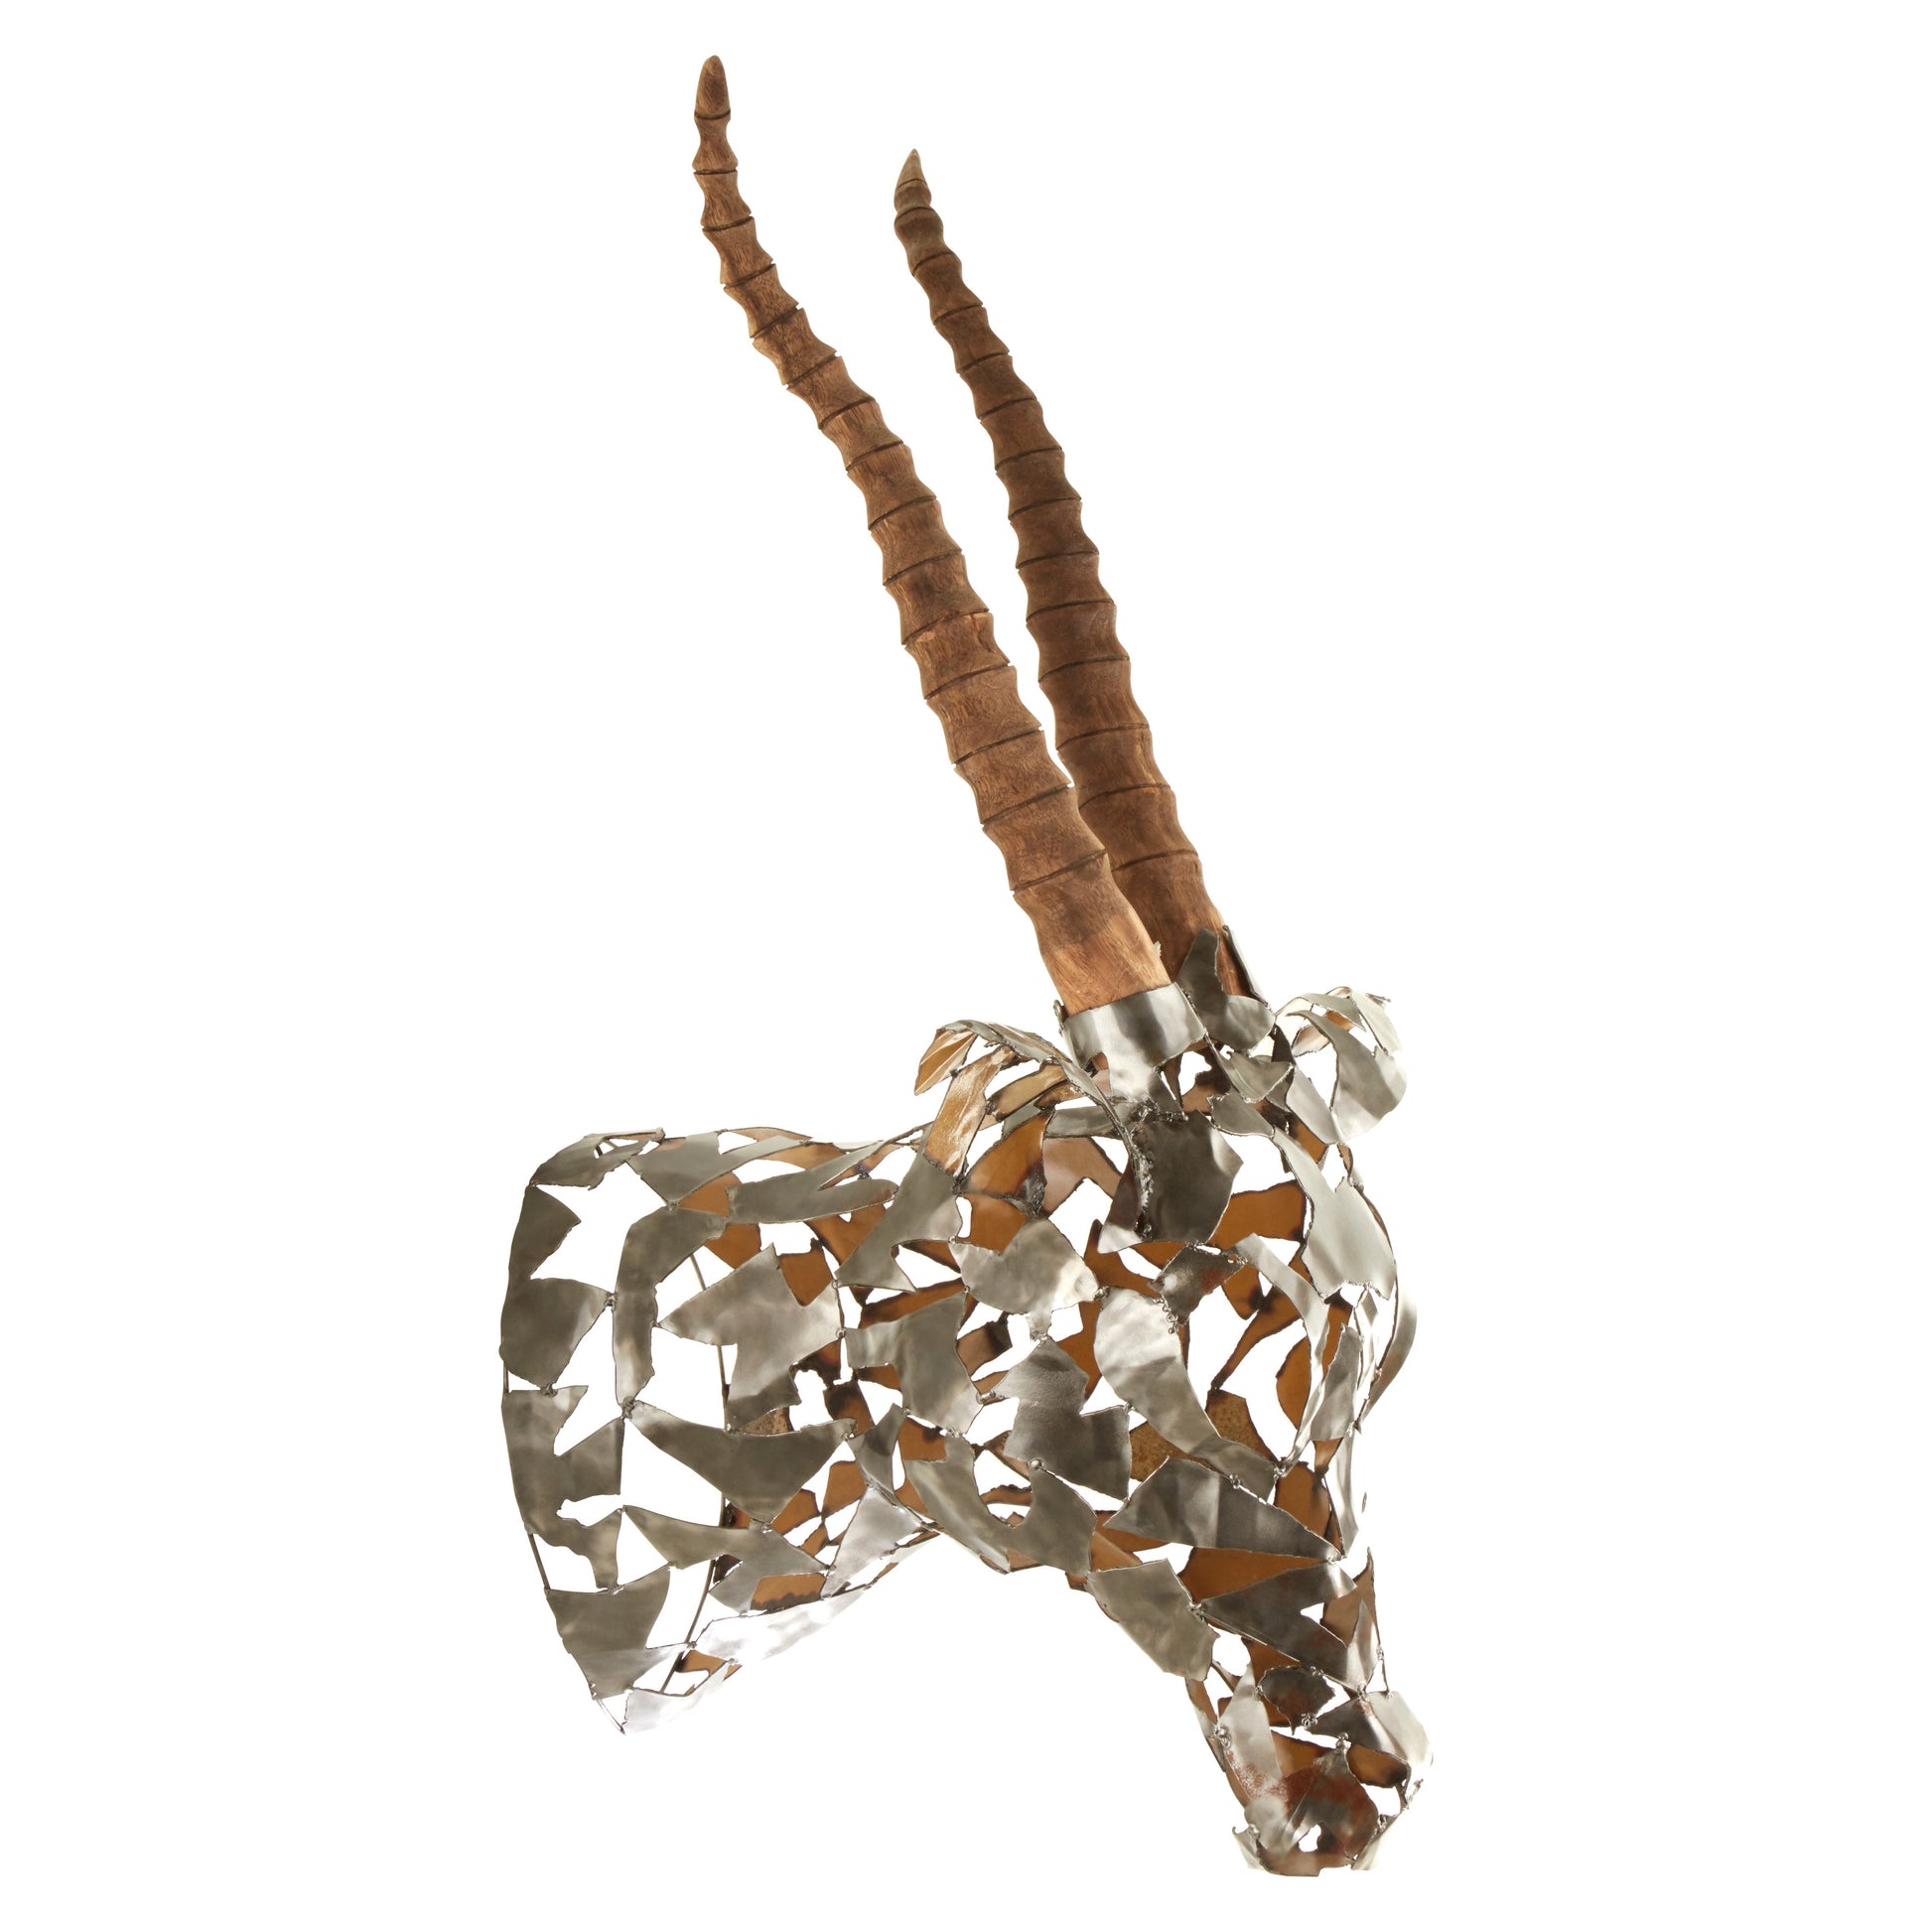 The Mad Max Antelope Ornament, Recycled Metal Shards, Wall Ornament - The Happy Den